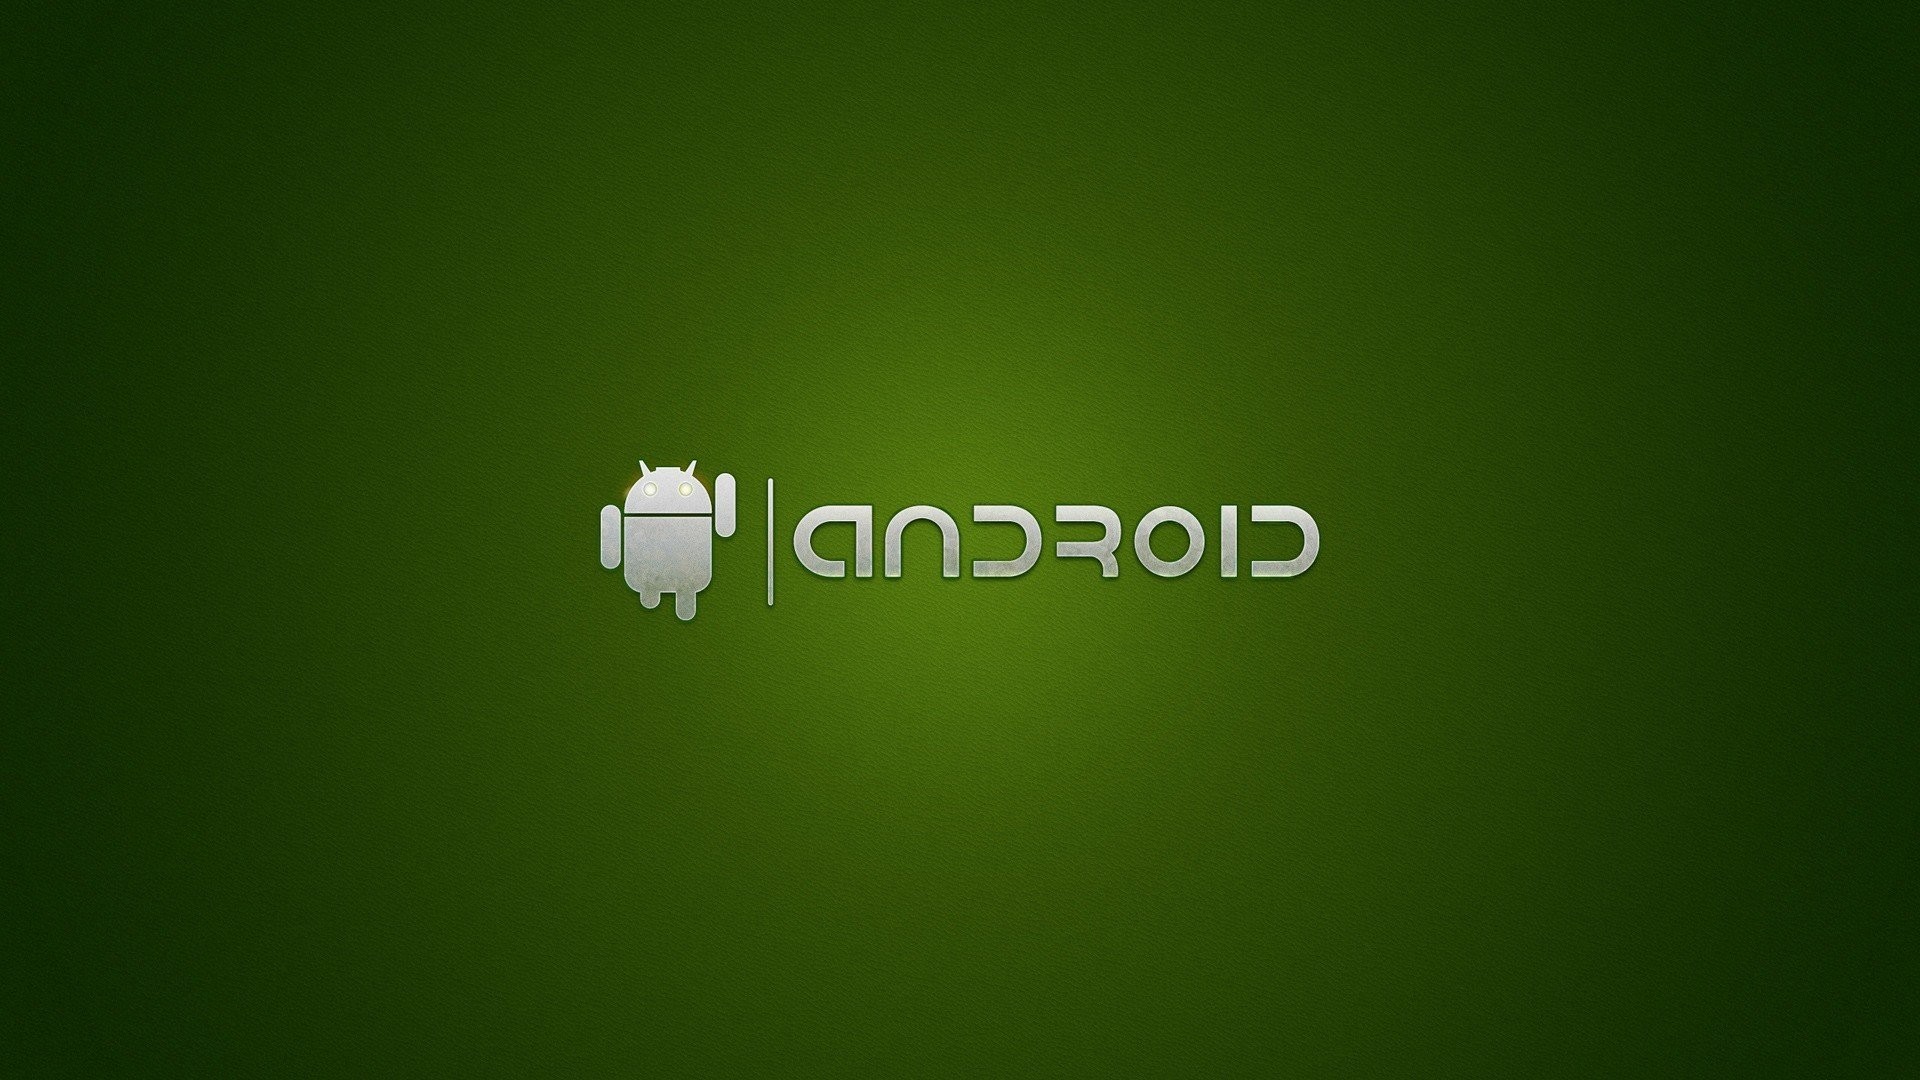 1920x1080  android operating system smartphone operating systems technology  simple background google wallpaper and background JPG 336 kB